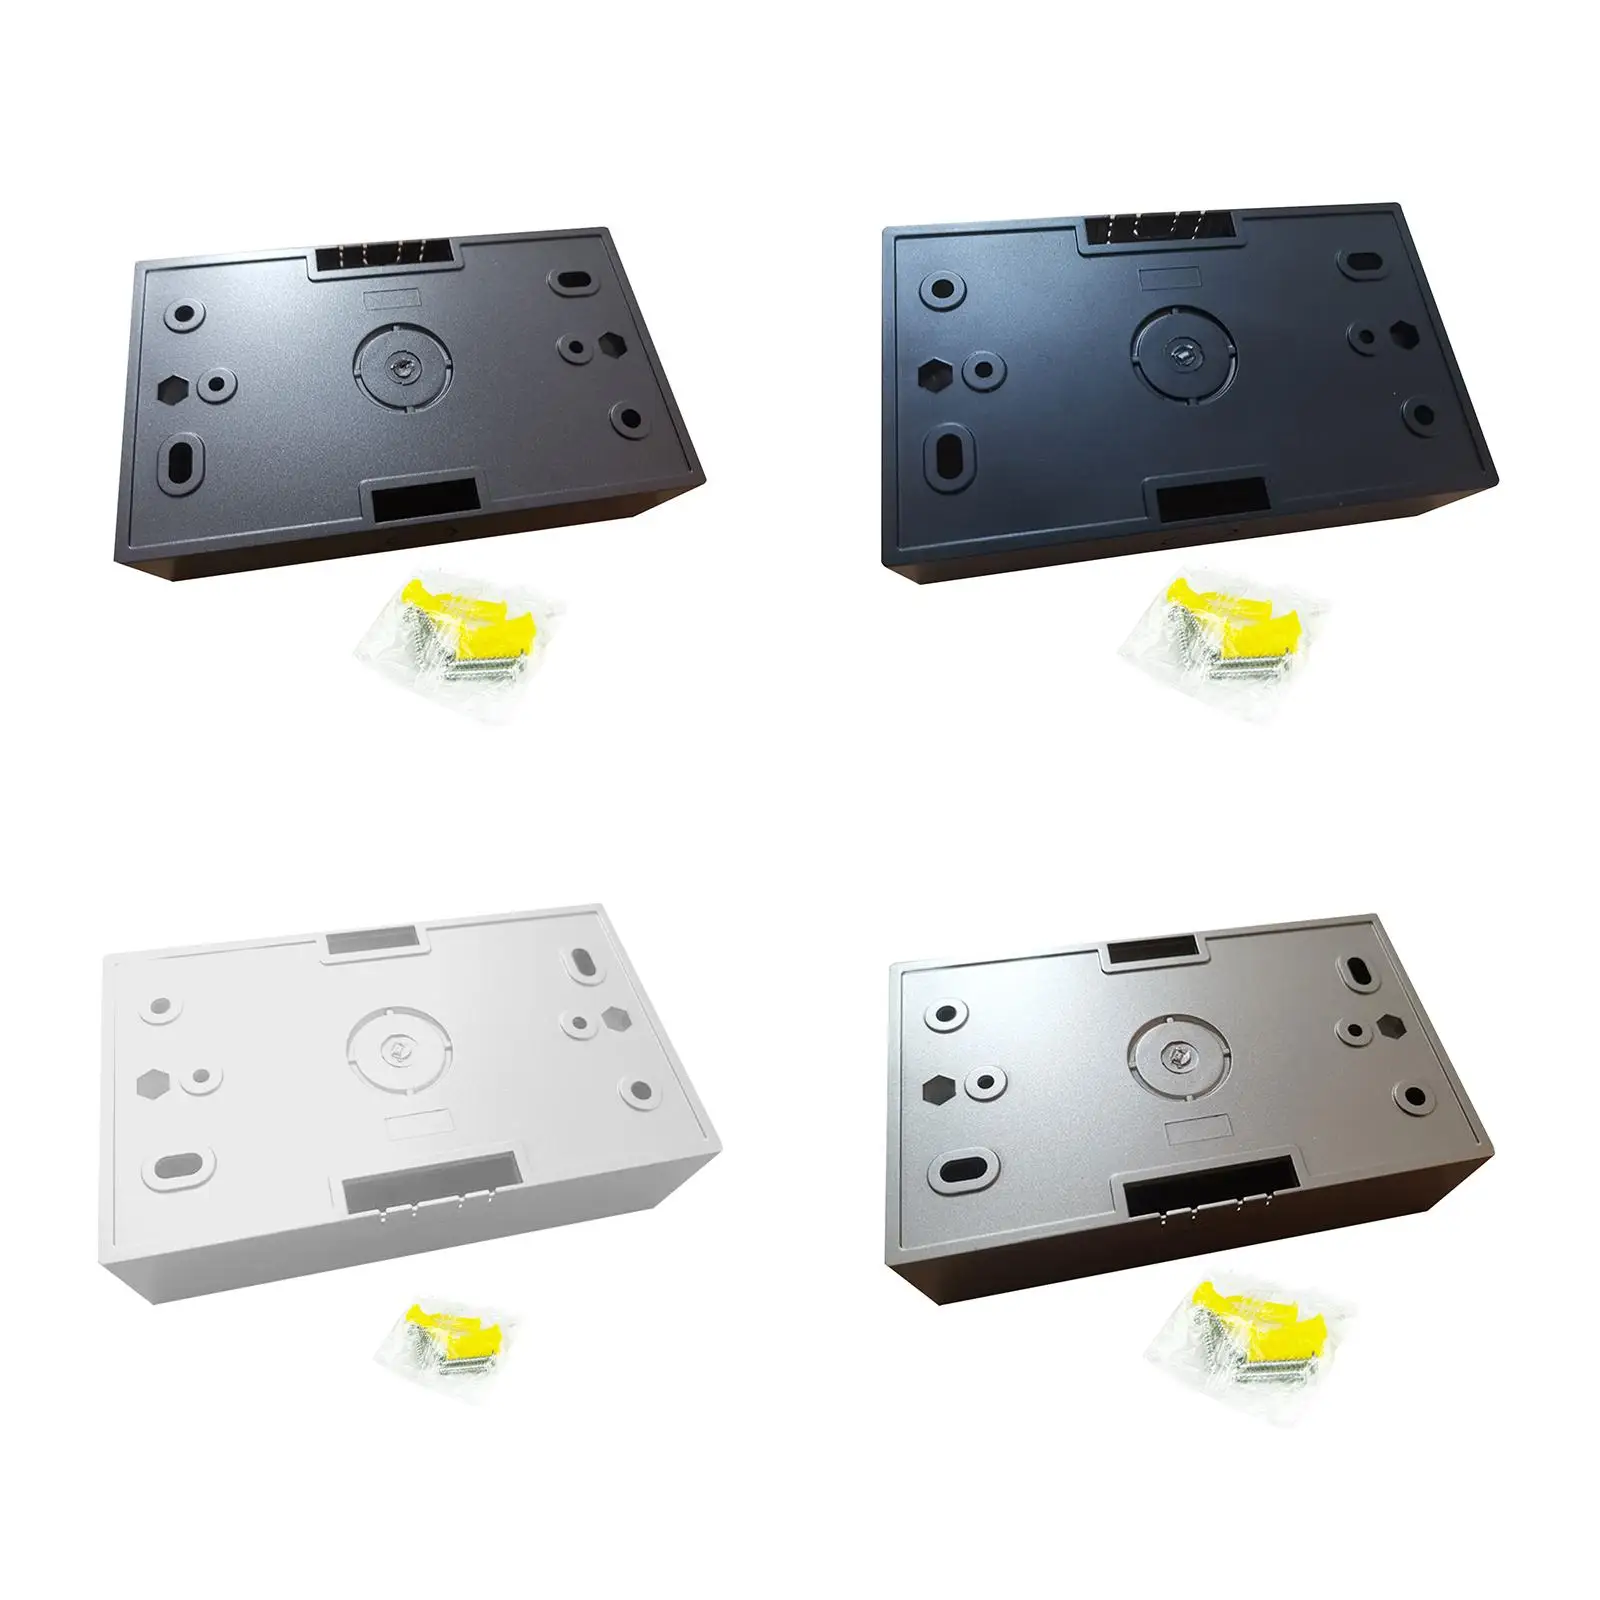 Electrical Project Case Power Junction Box 146x86x40mm Dustproof Accessory Direct Replaces Project Box DIY Case Enclosure